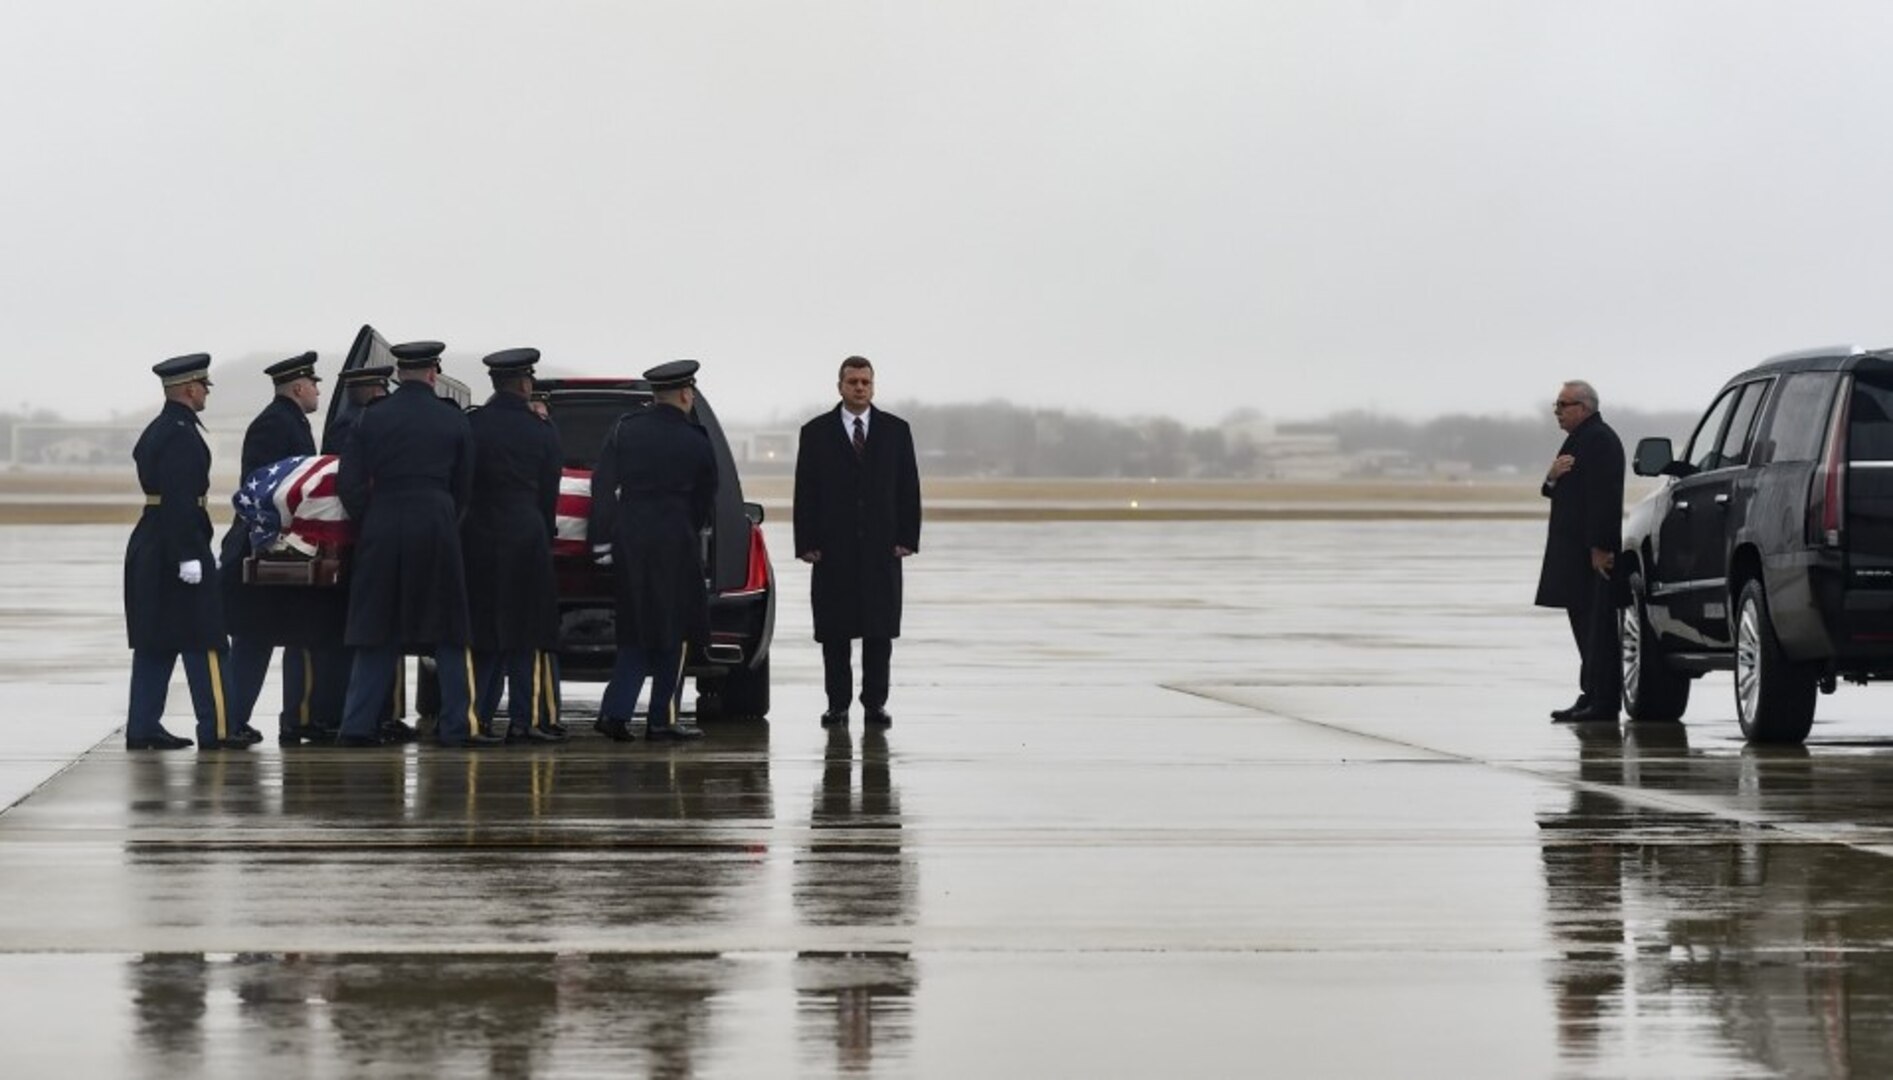 The U.S. Army 3rd Infantry Regiment (The Old Guard) body bearer team carries the casket of World War II Army veteran and former Rep. John D. Dingell (D-Mich.) at an Arrival Ceremony at Joint Base Andrews, Md., Feb. 12, 2019.